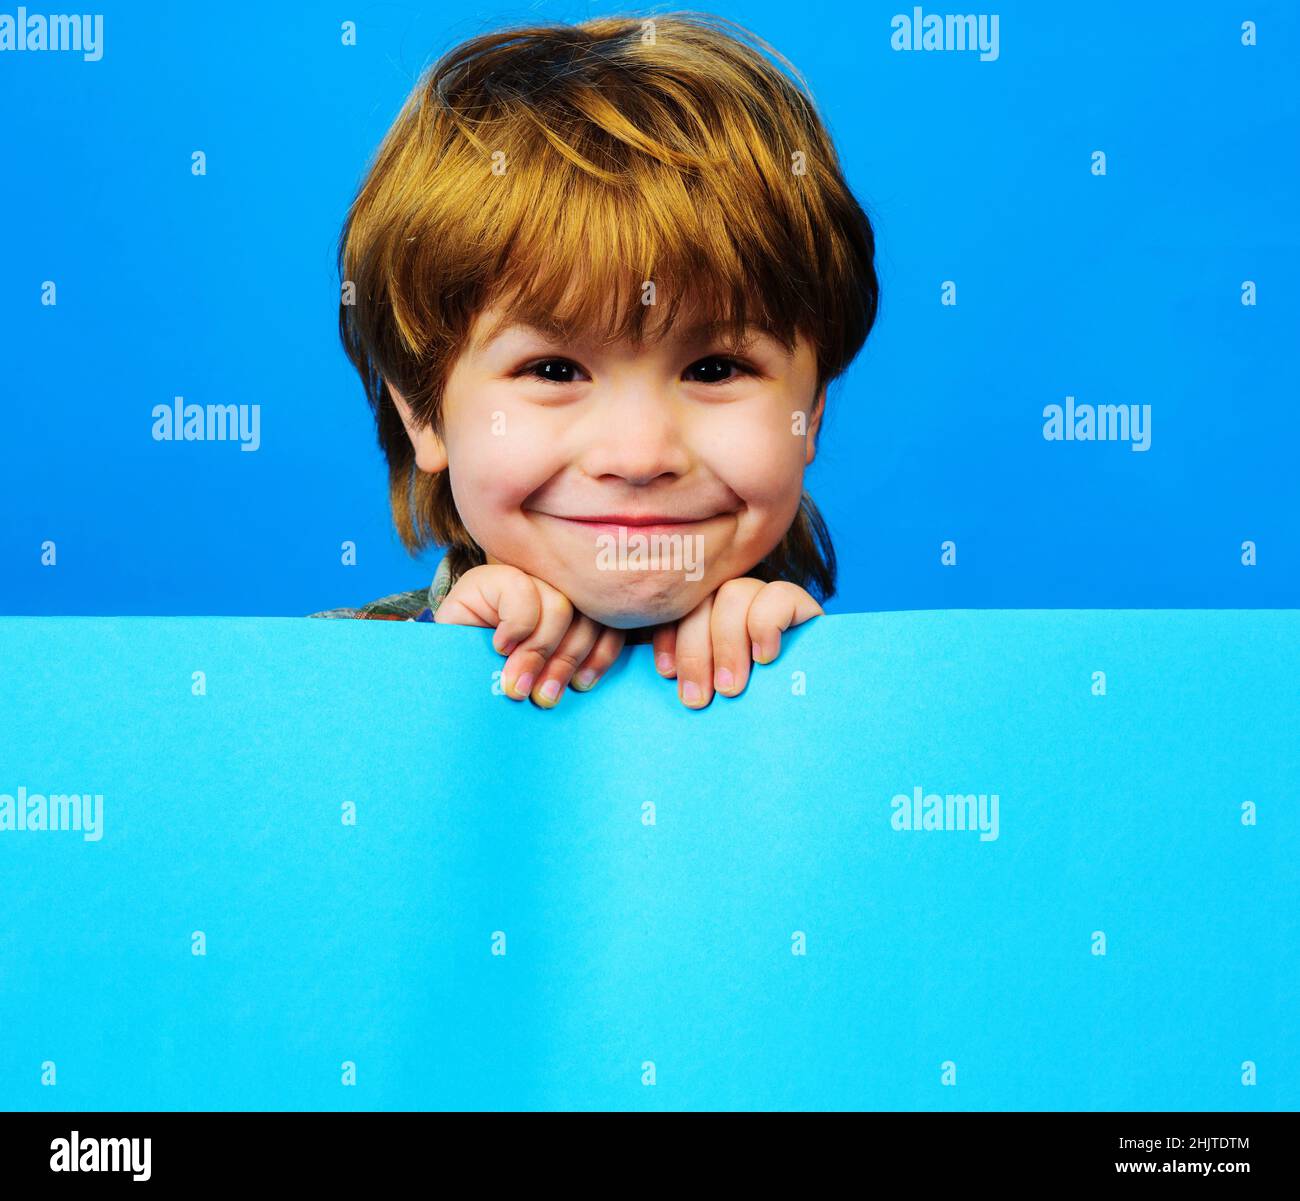 Smiling Child with advertising board. Shopping. Sale, Discount. Funny Little Kid with blank placard. Stock Photo